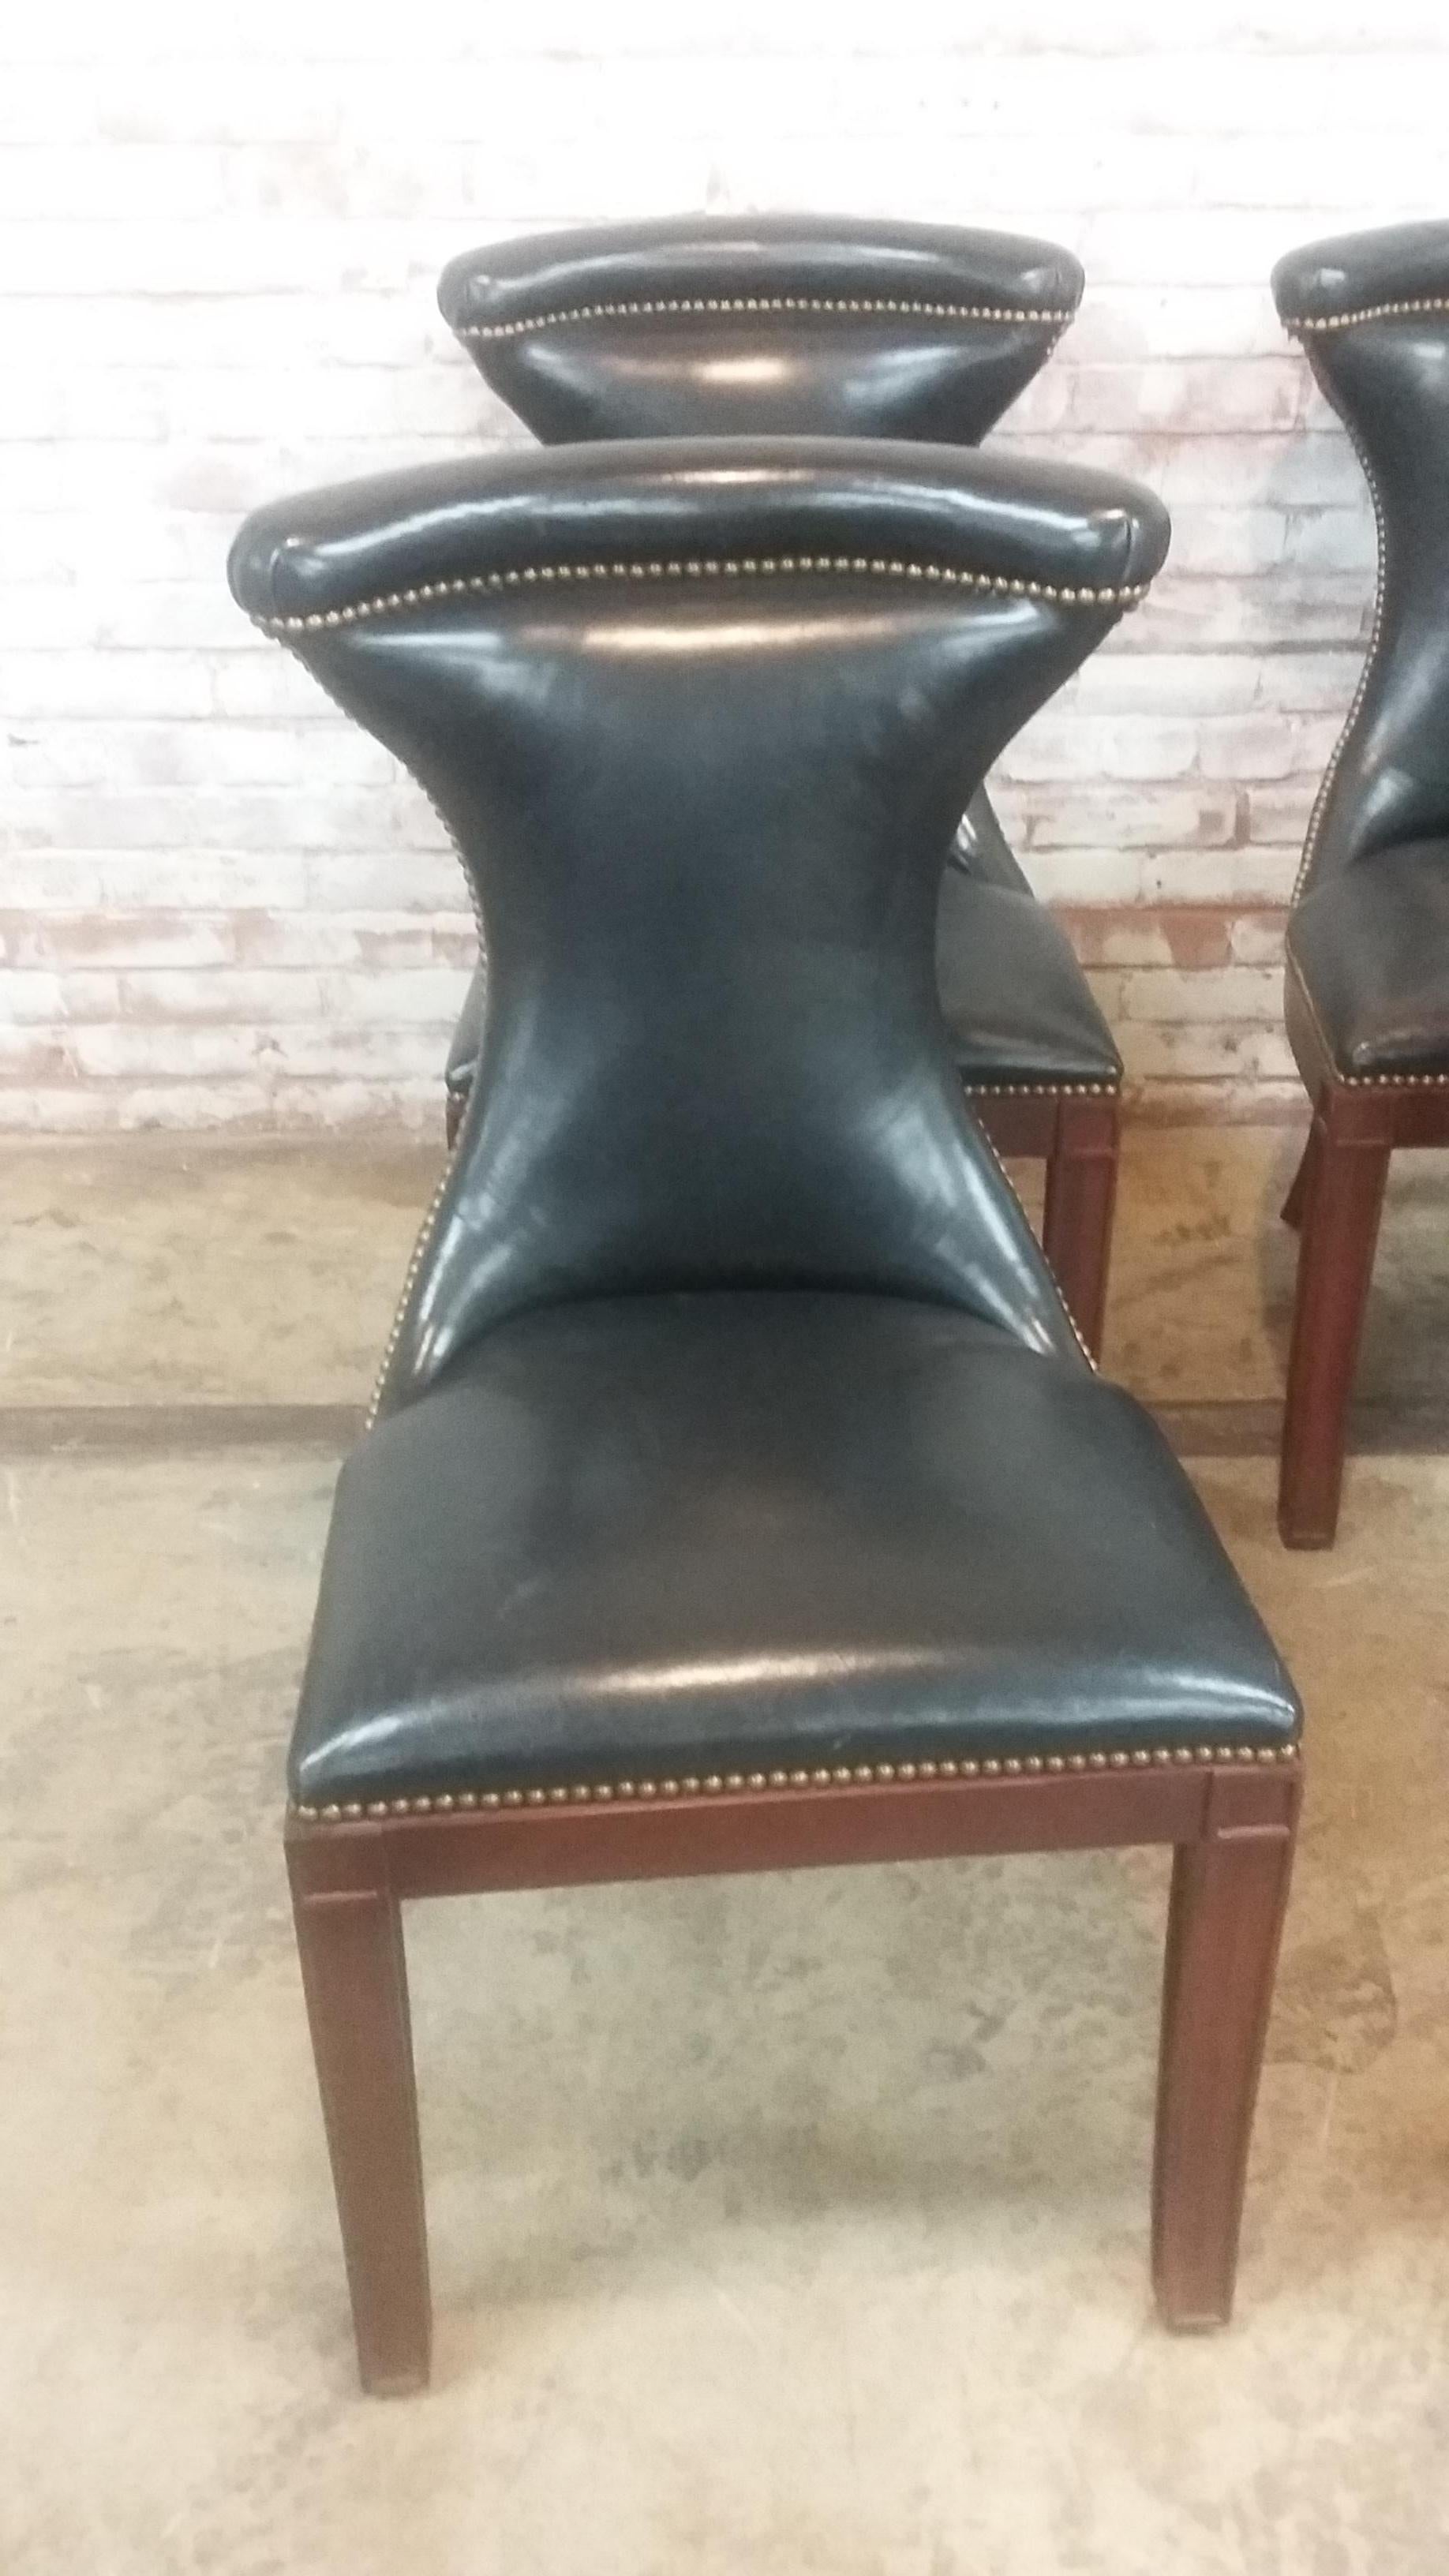 Terrific set of 6 leather dining chairs signed Ralph Lauren. Great leather chairs with brass nailheads along the back and sides of each chair. Mahogany finish to the fluted, carved legs. Nicely padded curve to the top of each one. Condition of each